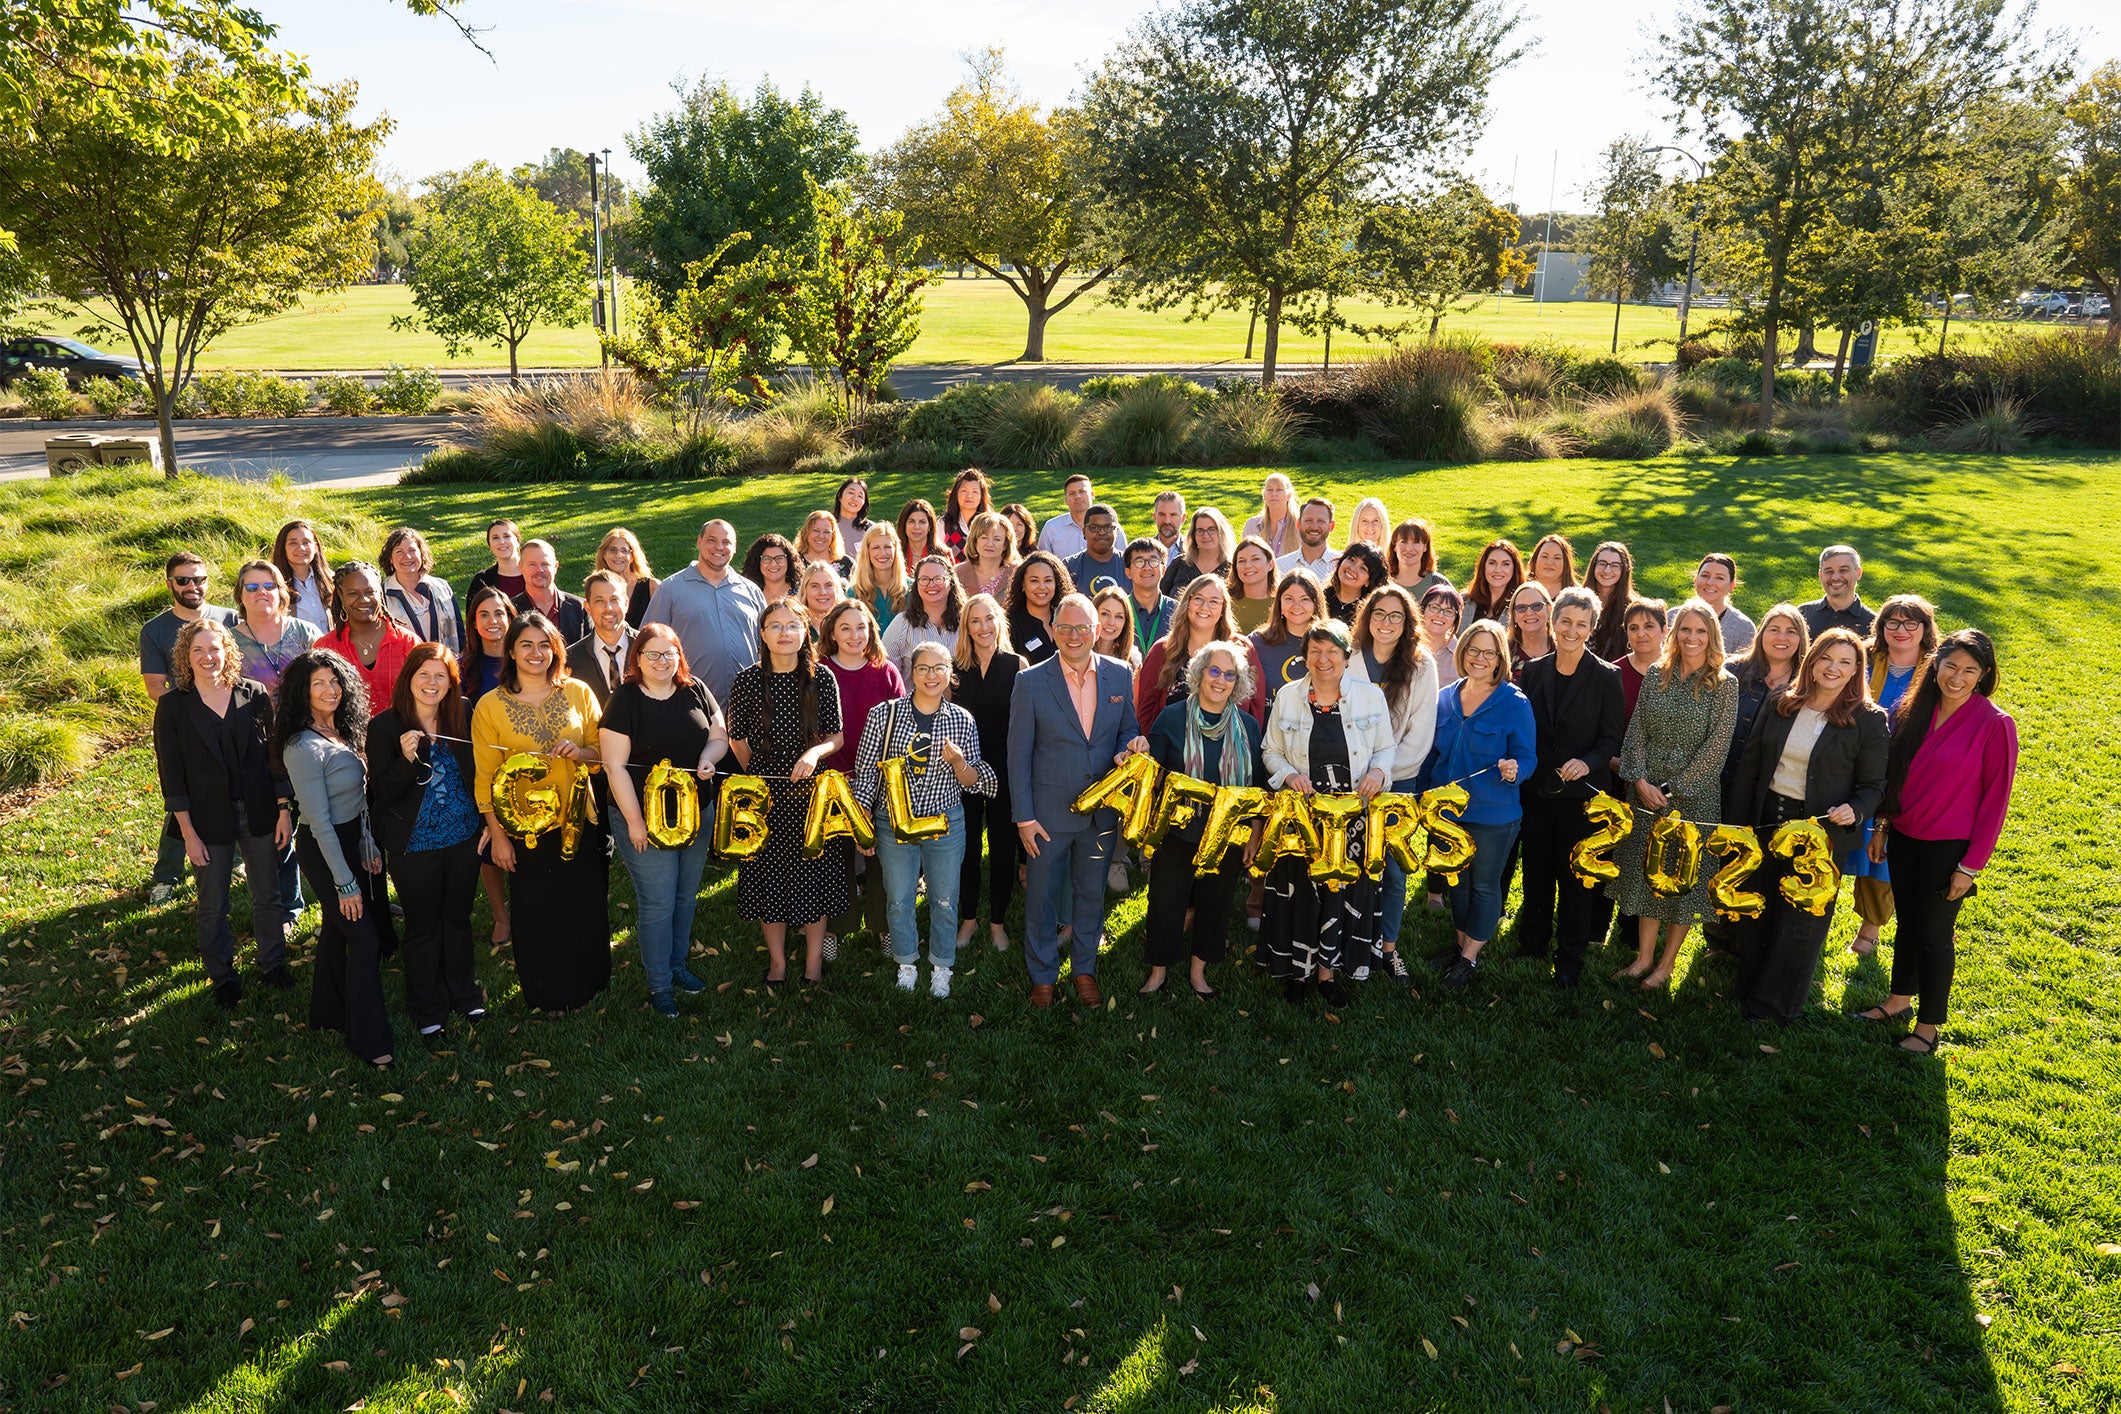 The dedicated team of UC Davis Global Affairs celebrates a year of fostering international relationships and educational opportunities in 2023. (TJ Ushing/UC Davis)